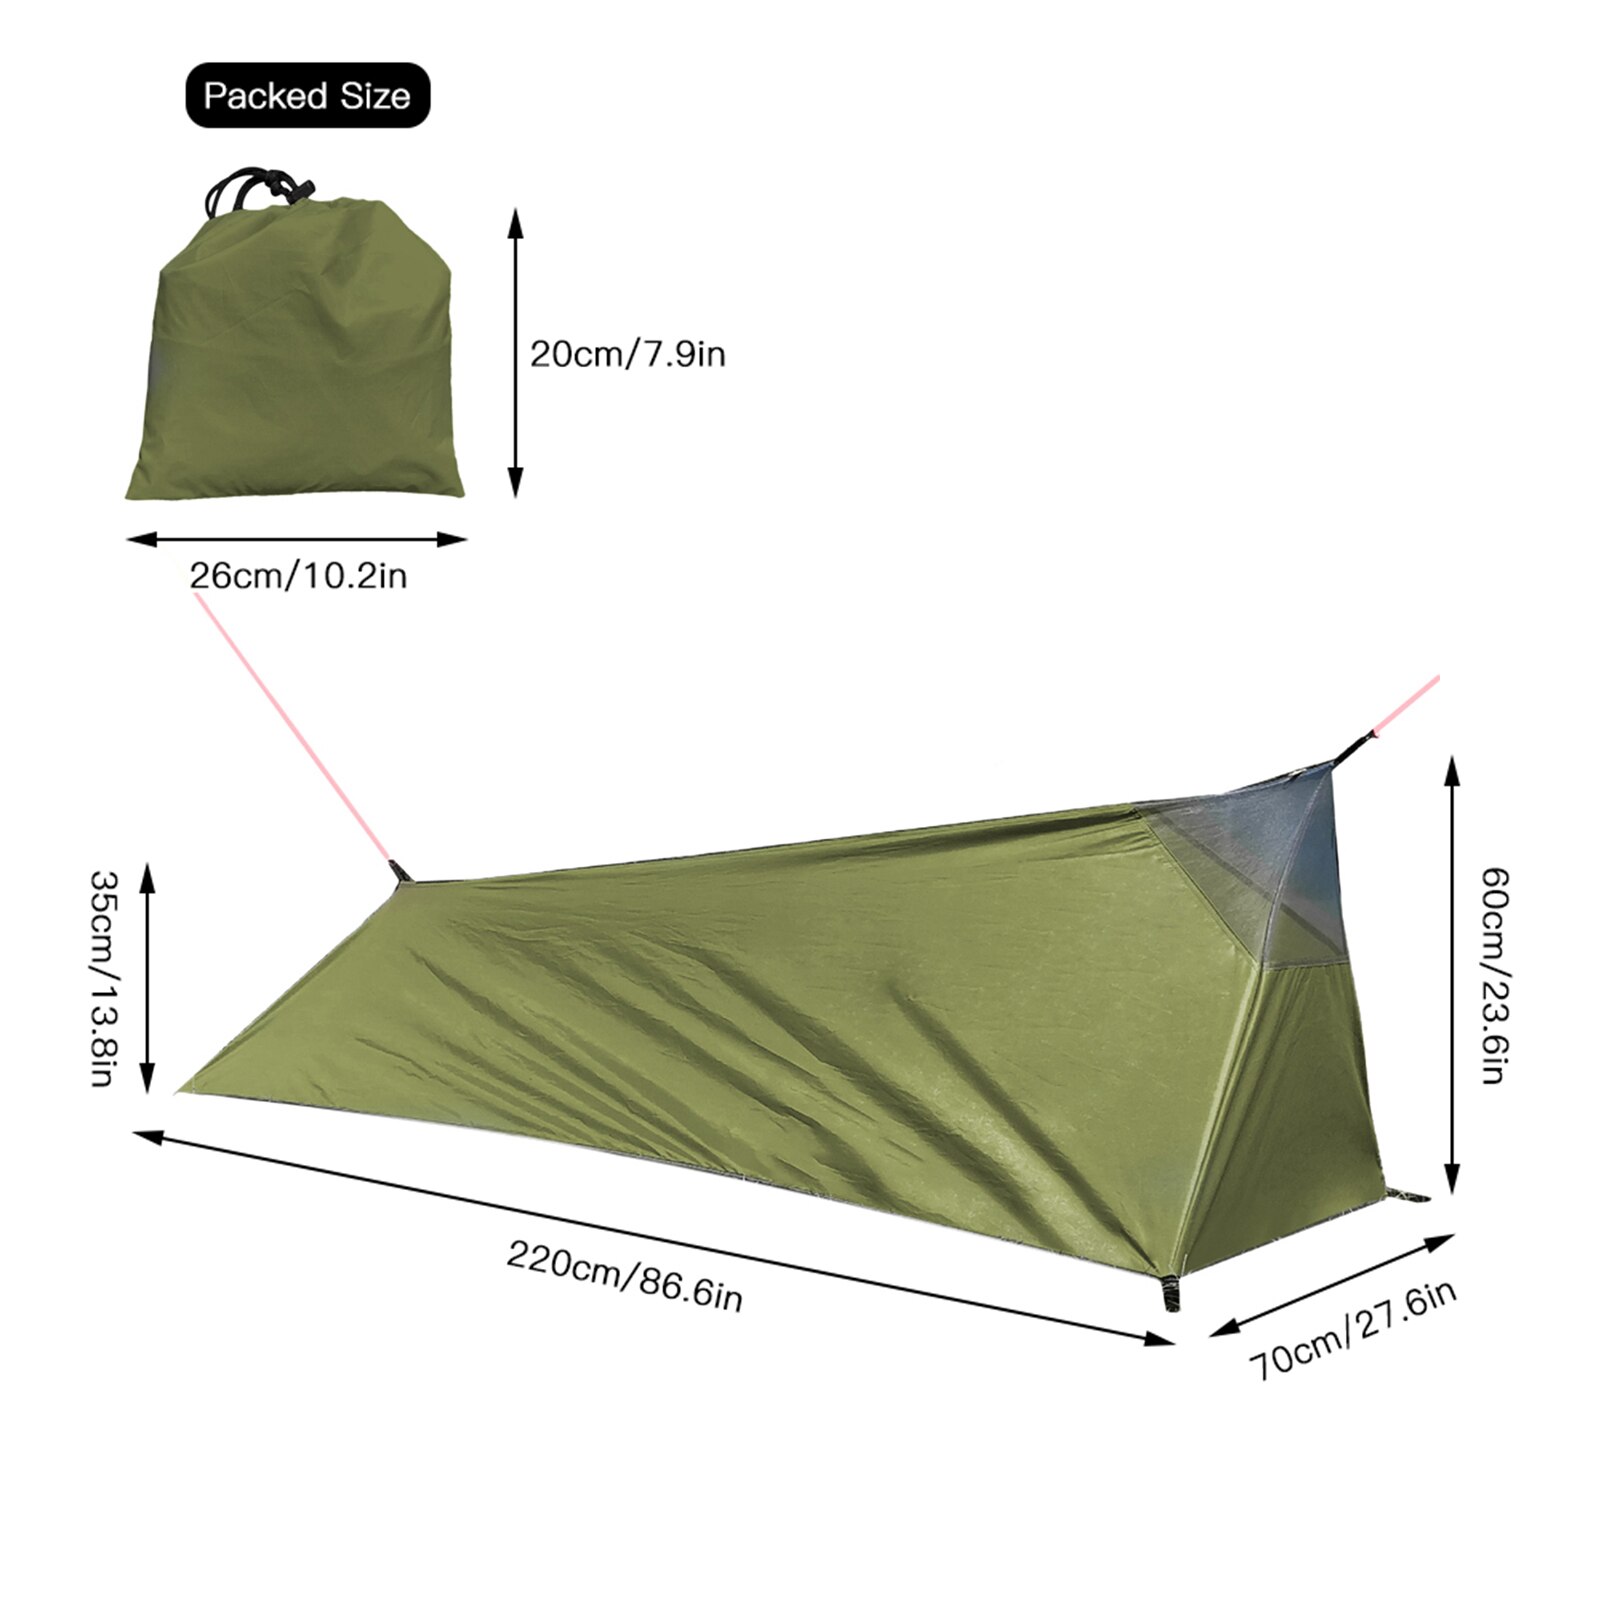 A Tower Ultralight Tent 1 Person Camping Tent Portable Canopy Hiking Mountaining Backpacking Waterproof Single Tent